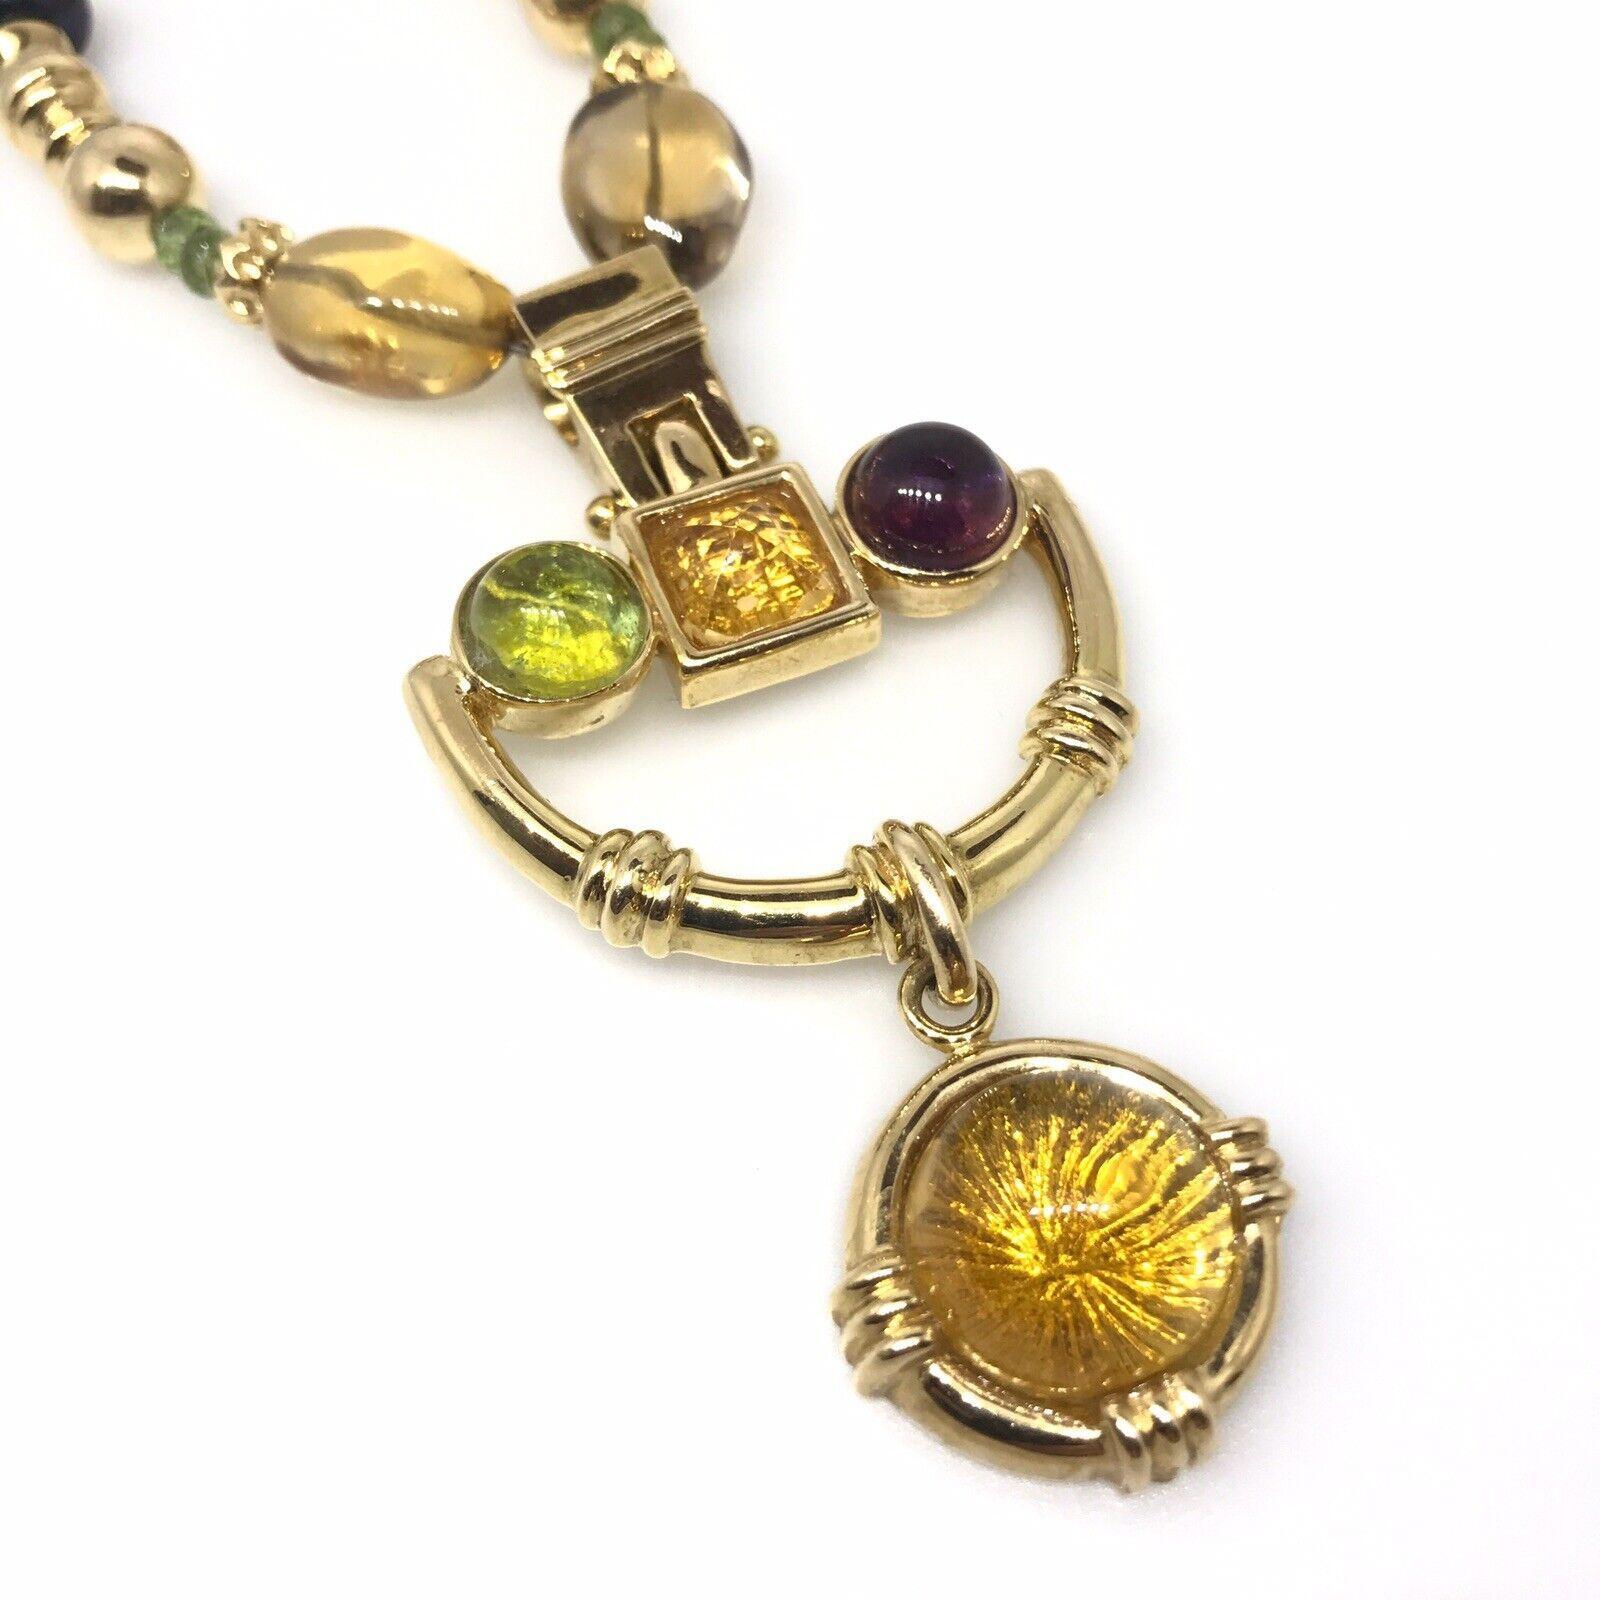 20 Inch Beaded Pendant Necklace with Citrine and Peridot 14k Yellow Gold In Excellent Condition For Sale In La Jolla, CA